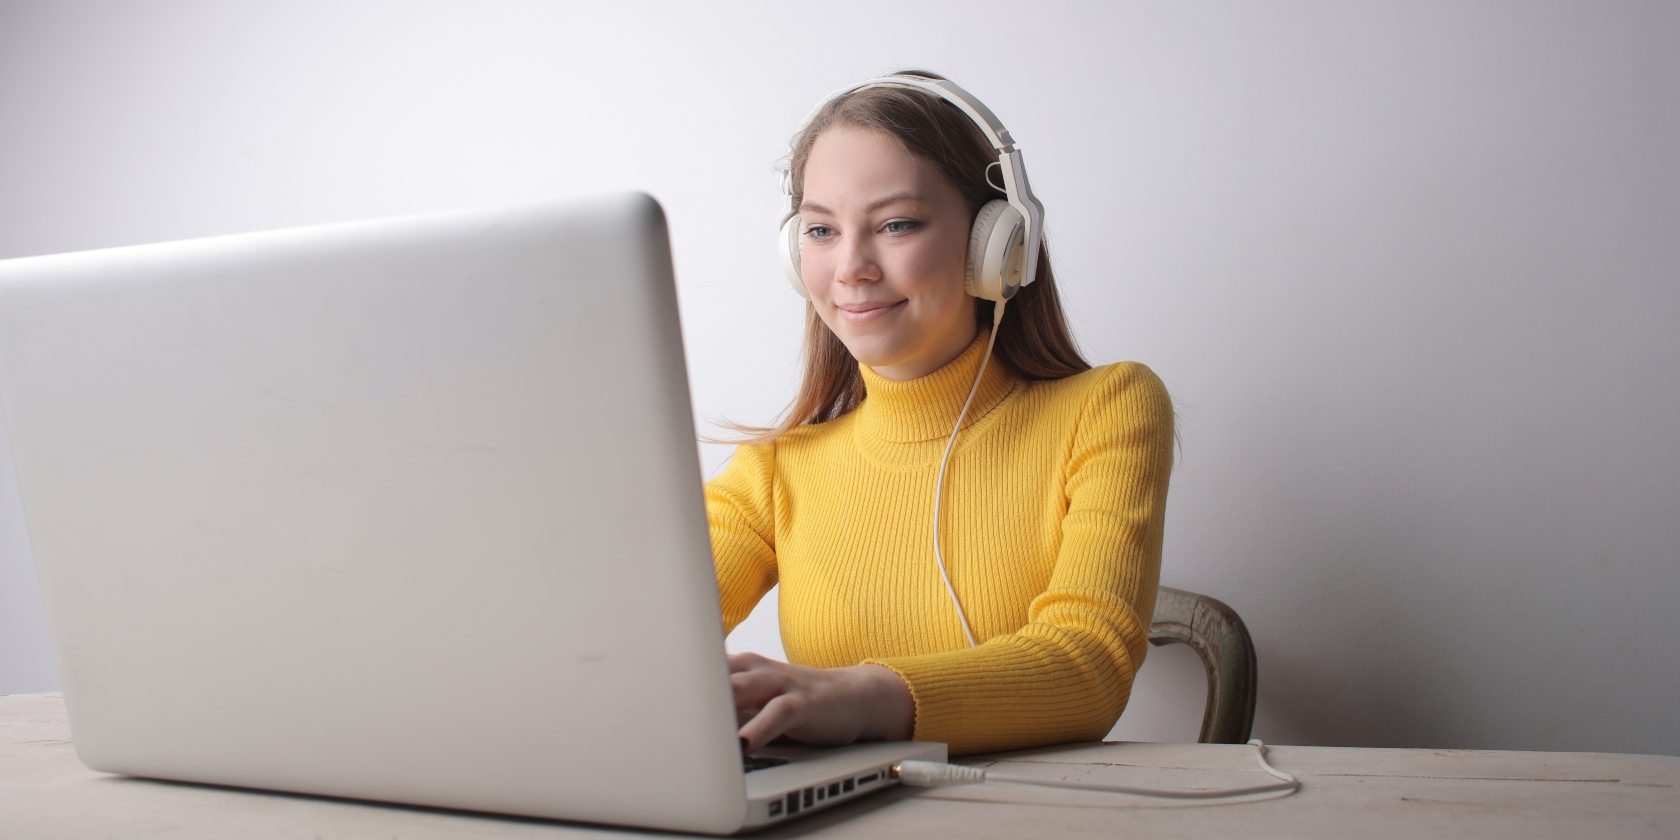 Young woman sat working on her laptop with headphones on.